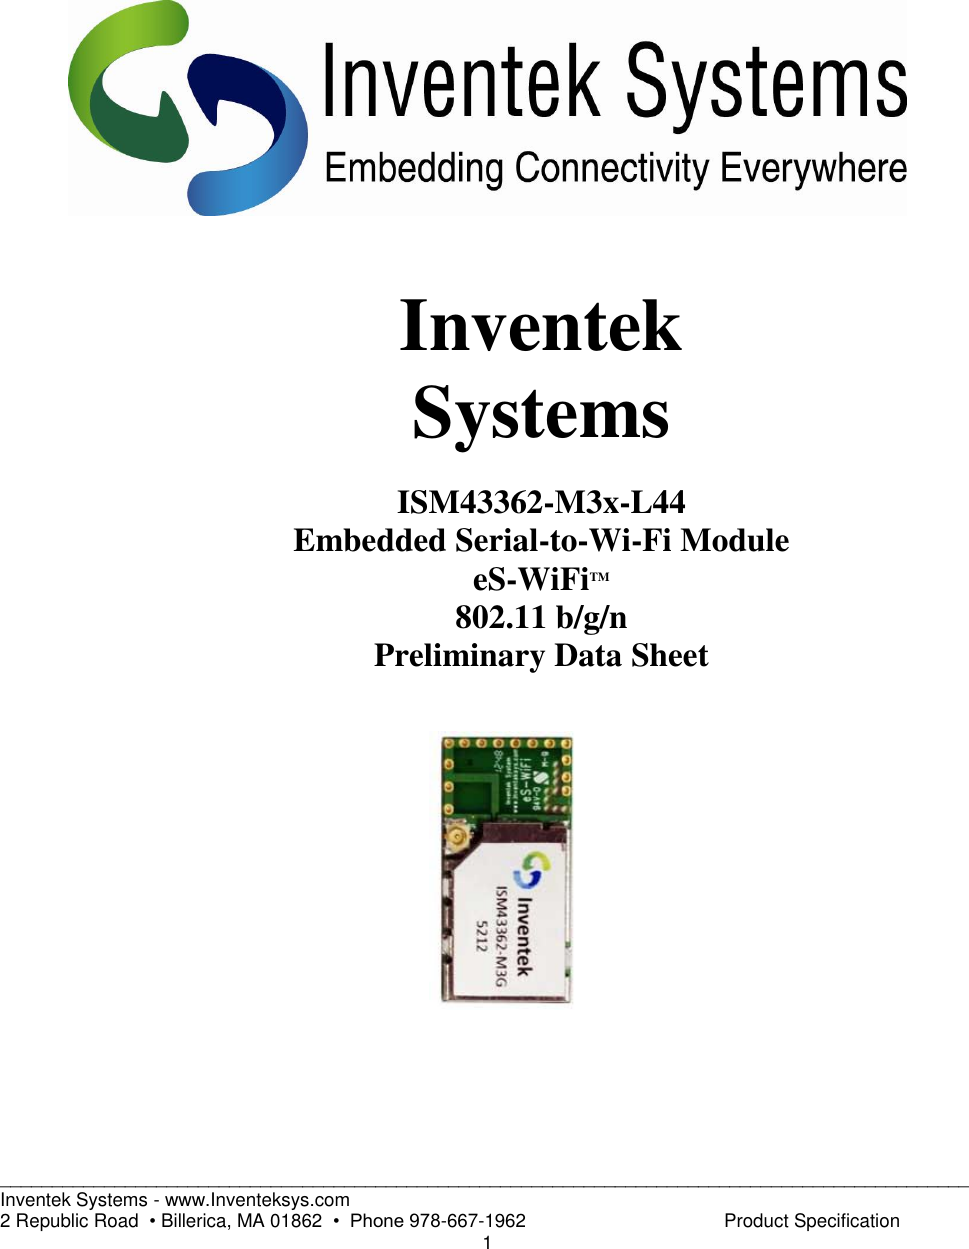 _____________________________________________________________________________________________ Inventek Systems - www.Inventeksys.com   2 Republic Road  • Billerica, MA 01862  •  Phone 978-667-1962                                      Product Specification     1                          Inventek Systems  ISM43362-M3x-L44 Embedded Serial-to-Wi-Fi Module eS-WiFiTM 802.11 b/g/n Preliminary Data Sheet    